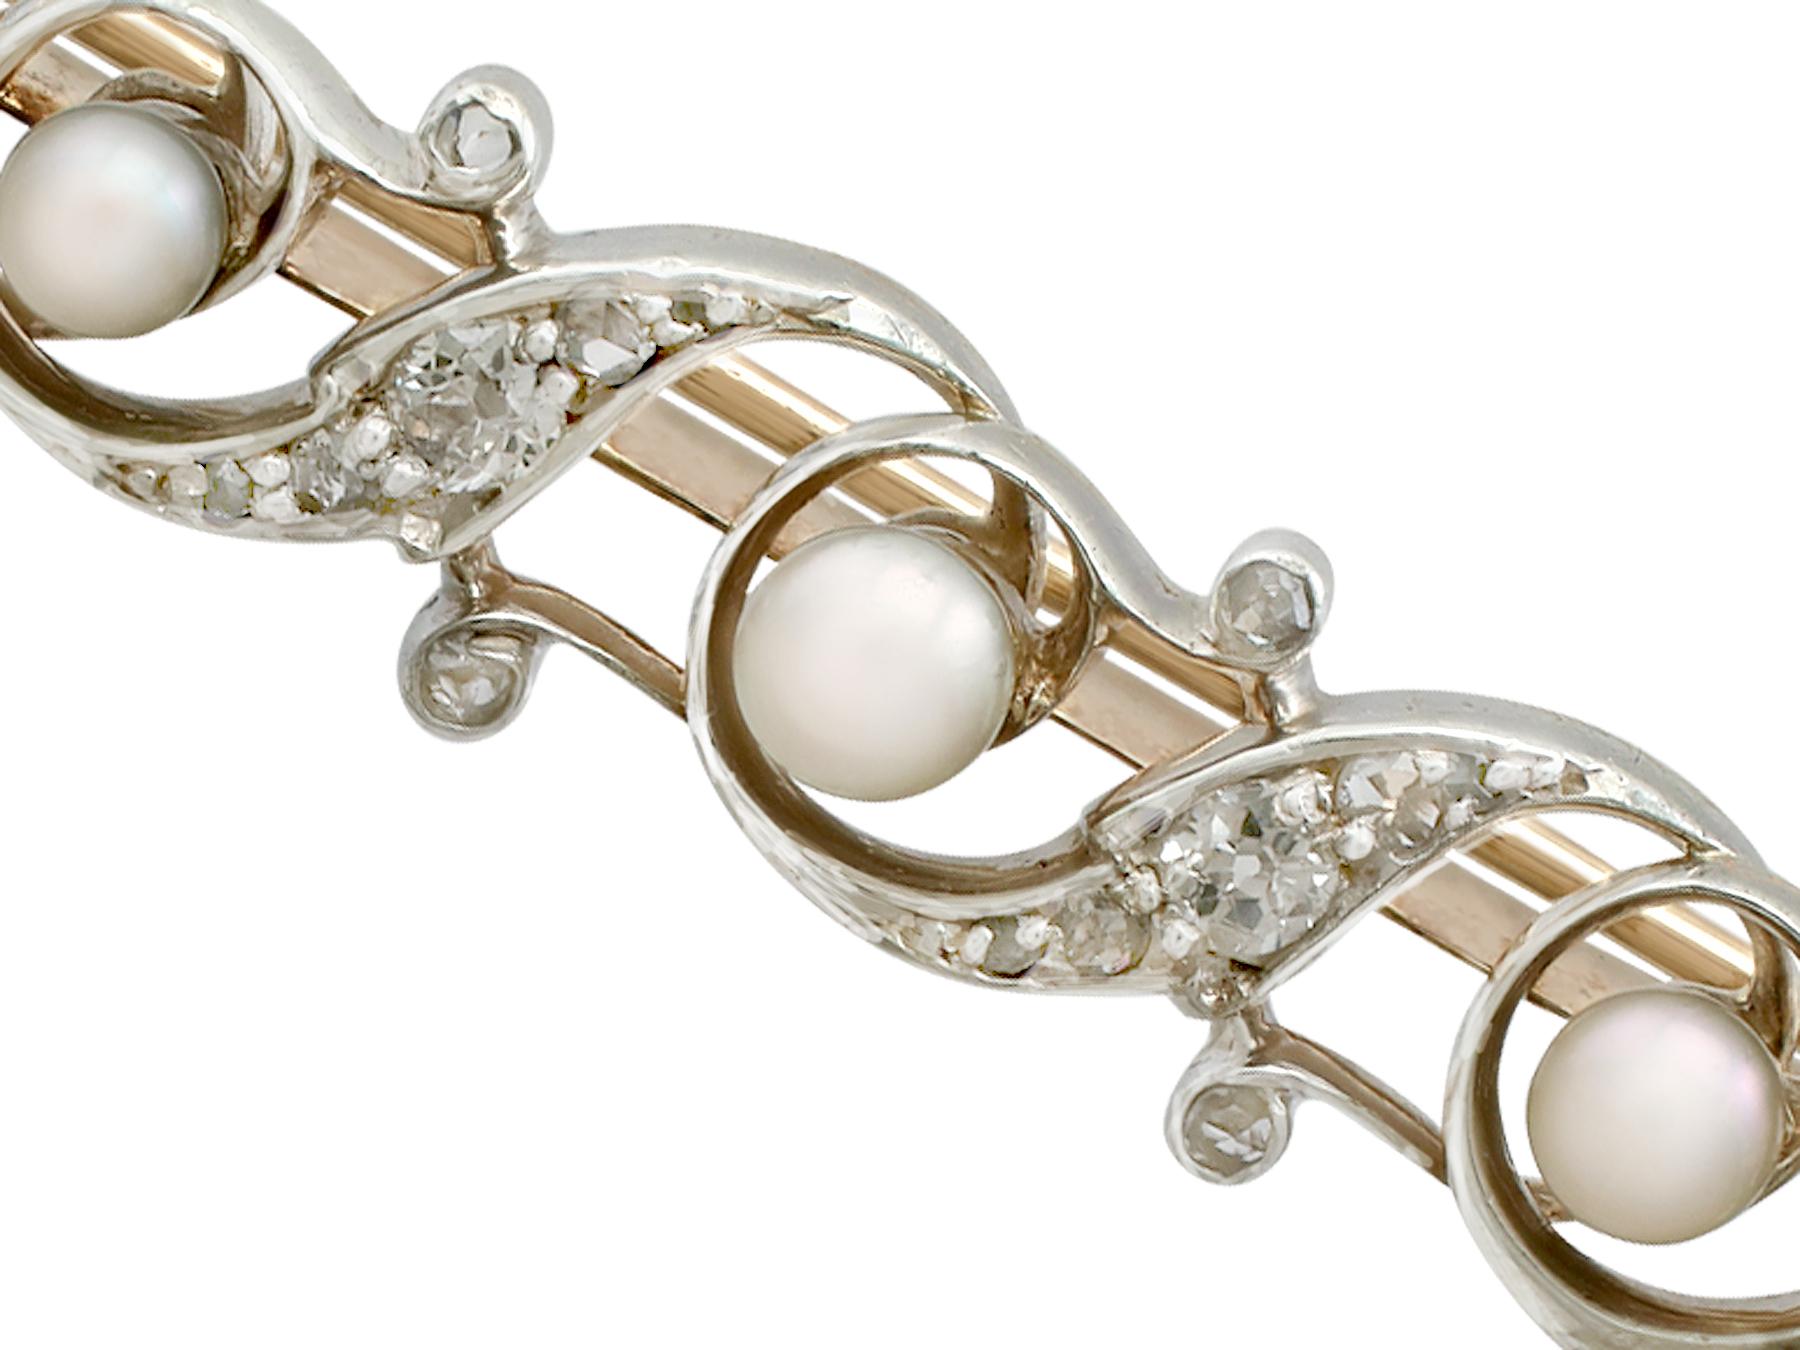 An impressive antique pearl and 0.75 carat diamond, 9 karat yellow gold and silver set bar brooch; part of our diverse antique jewelry and estate jewelry collections.

This fine and impressive antique pearl brooch has been crafted in 9k yellow gold